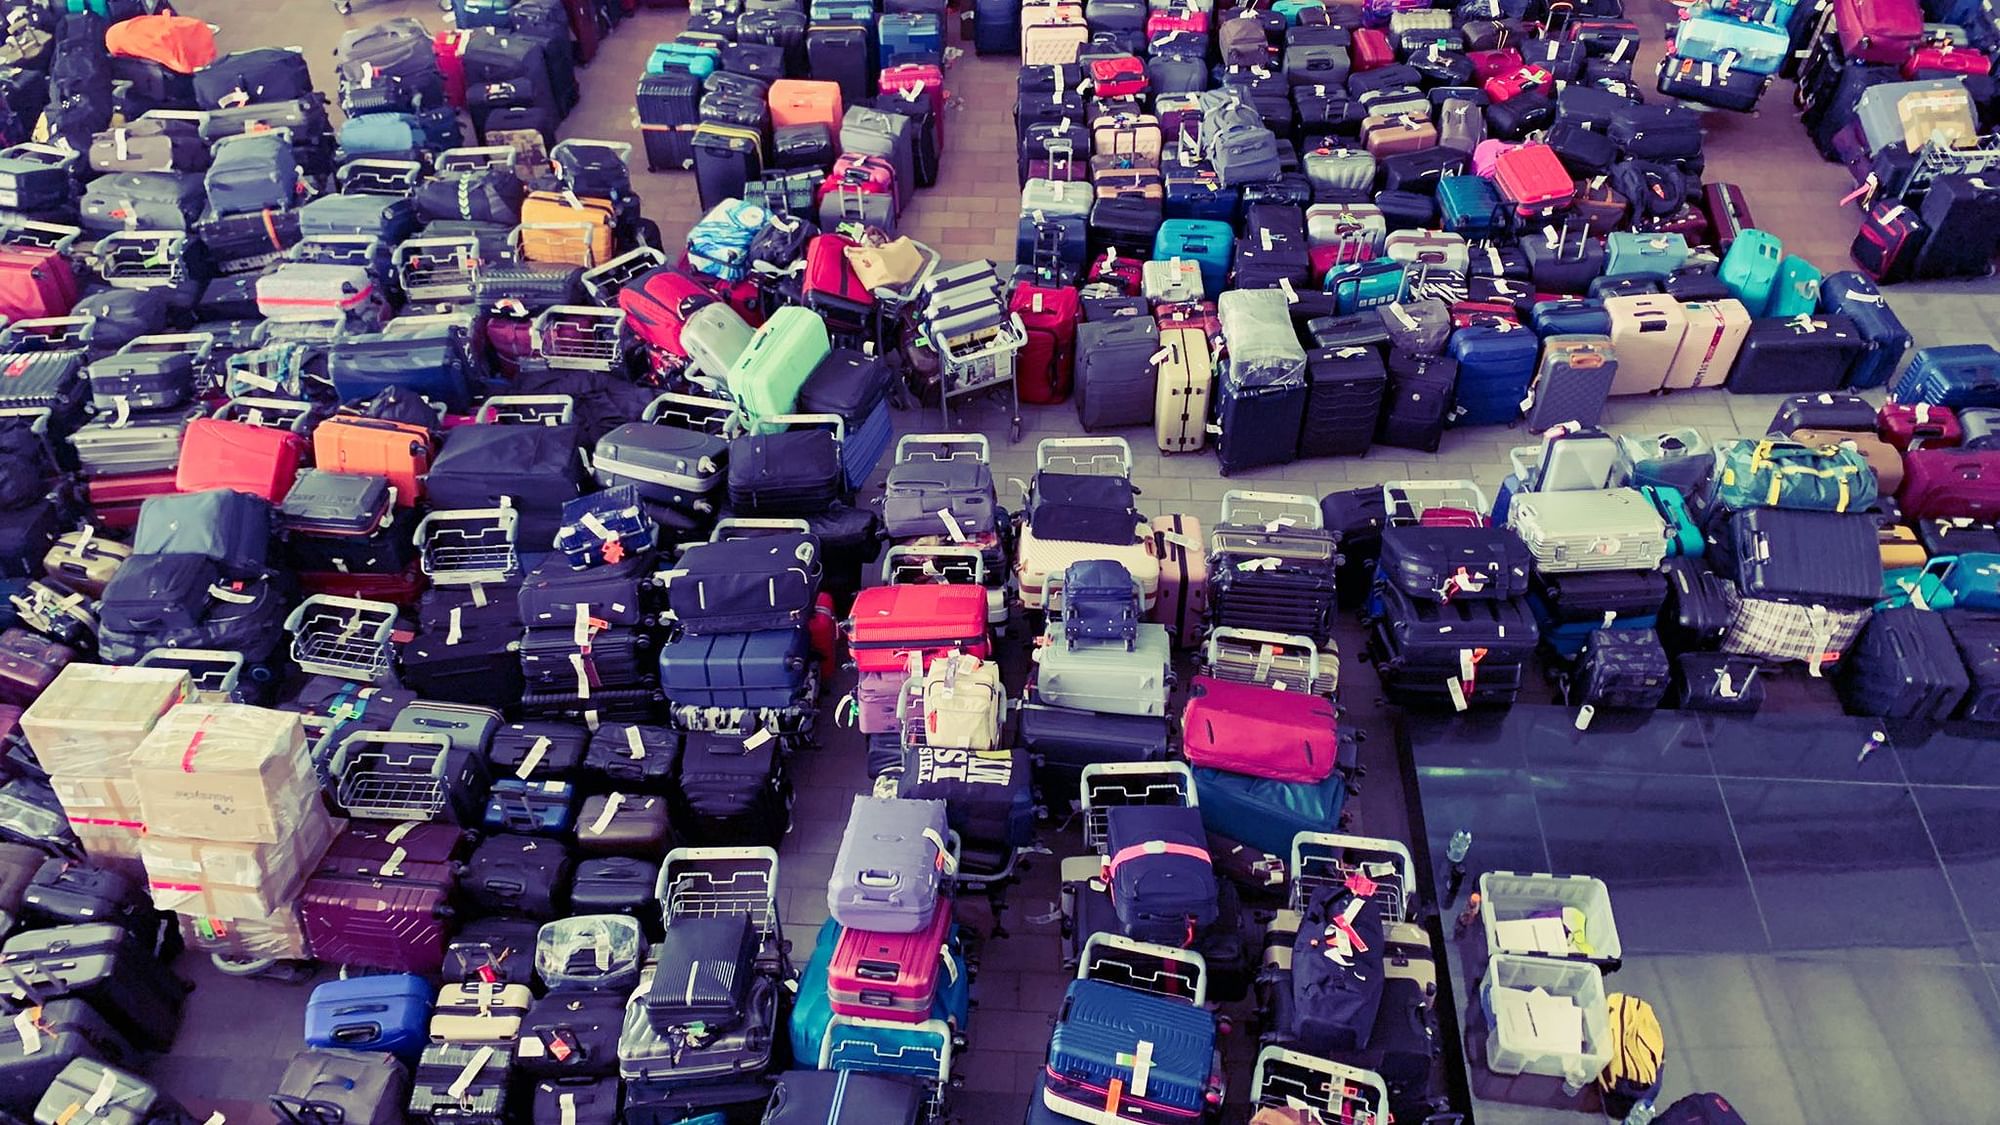 <div class="paragraphs"><p>Over the weekend, stunning images of baggage handling issues emerged from London's Heathrow airport, with airlines on Monday being consequently asked to cancel 10 percent of their flights from Terminals 2 and 3.</p></div>